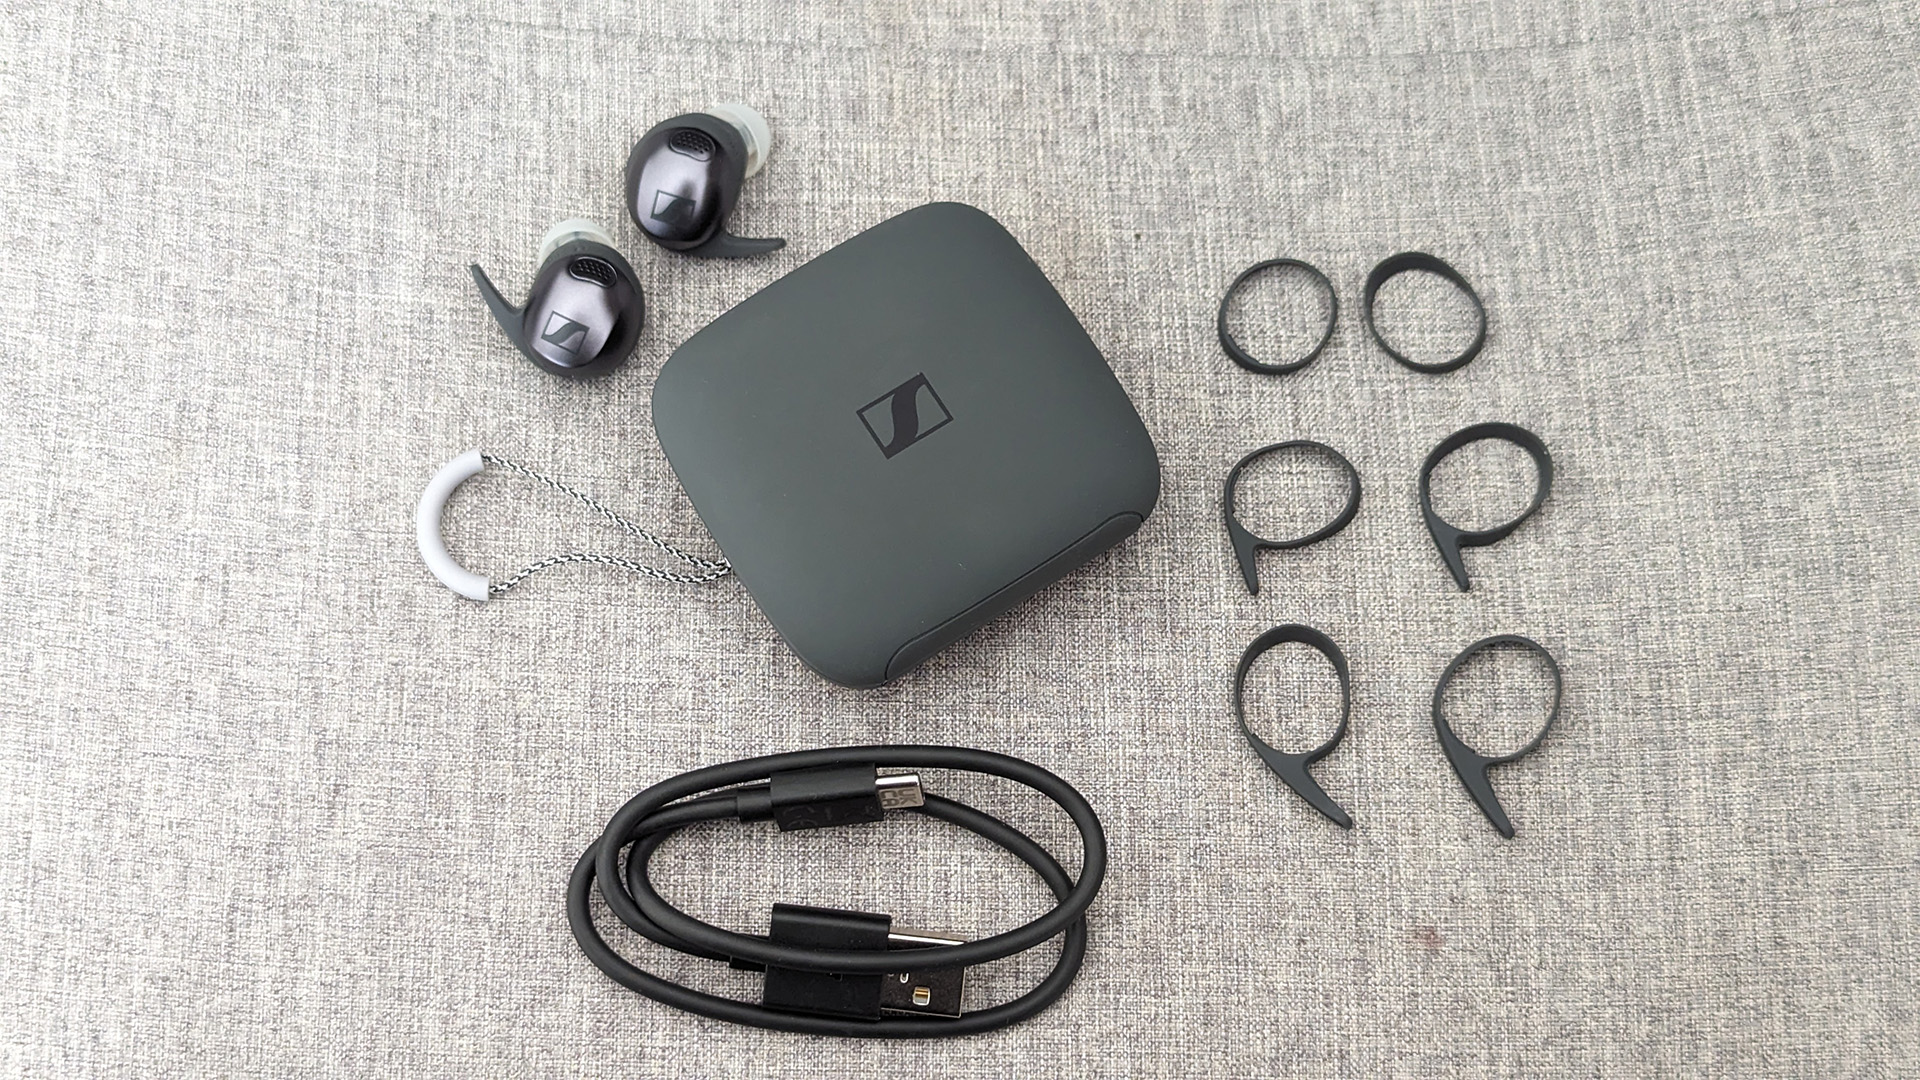 Sennheiser Momentum Sport in-ear headphones showing earbuds, case and accessories